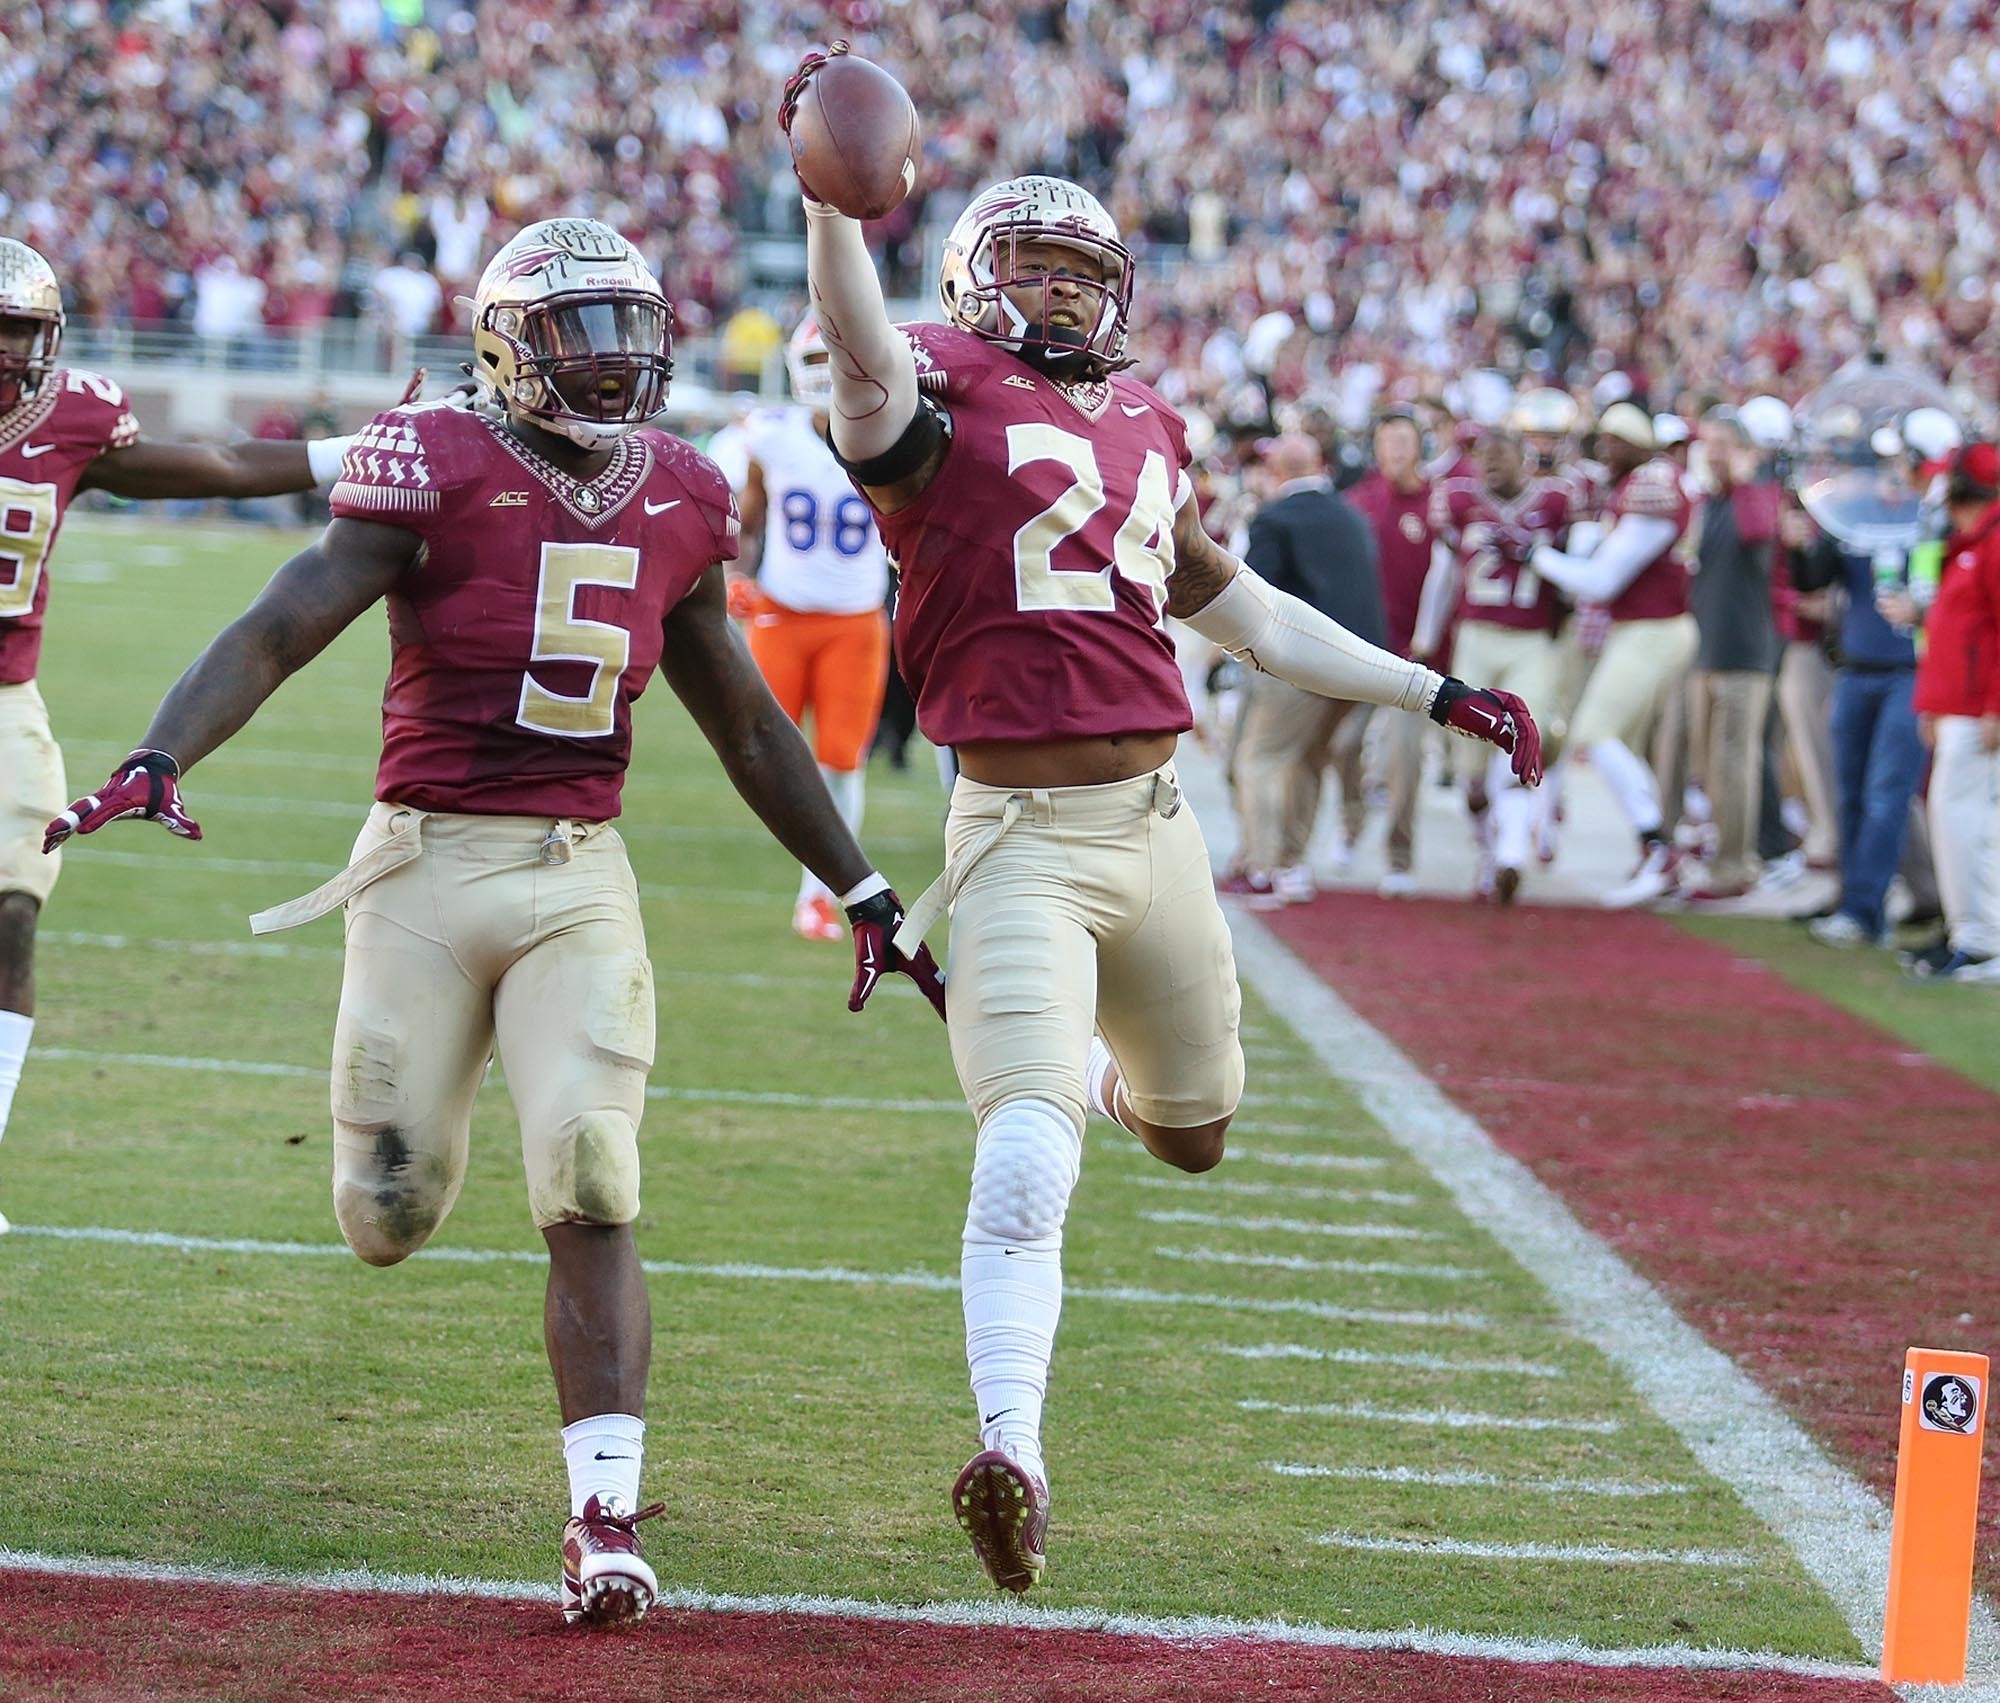 FSU drops to No. 4 in latest College Football Playoff rankings